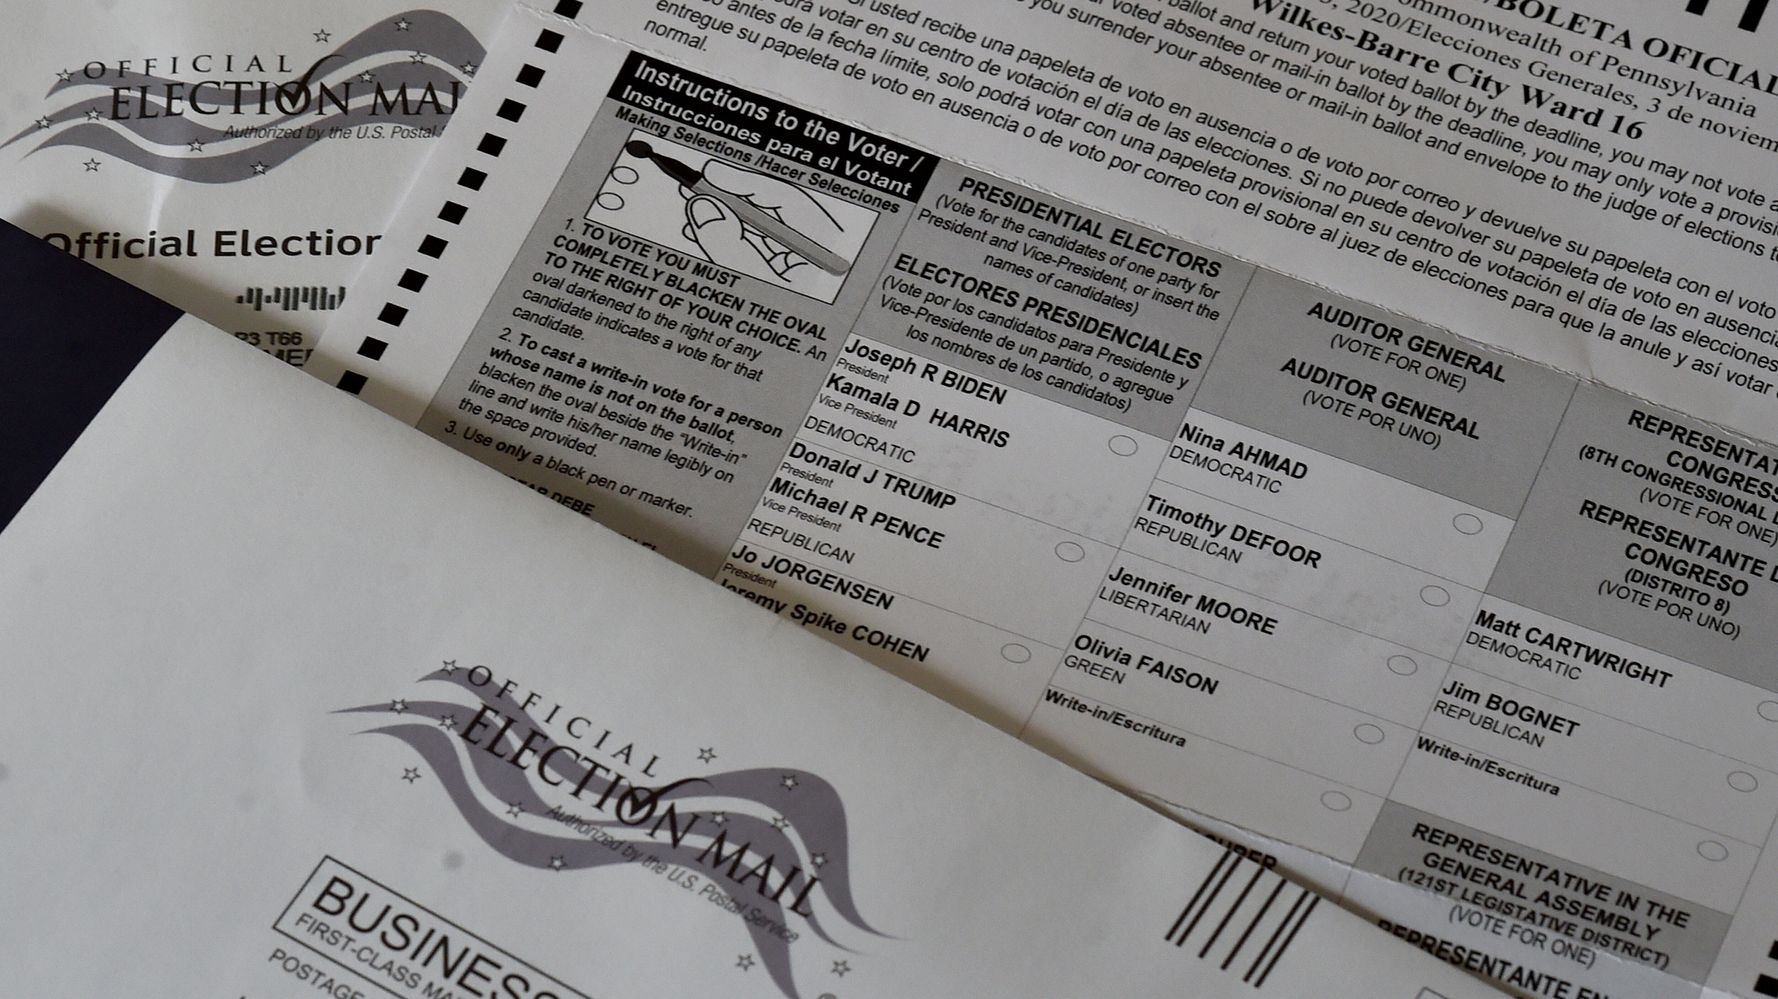 Pennsylvania Top Court Says Mail-In Ballots Can’t Be Rejected Over Signature Mismatches